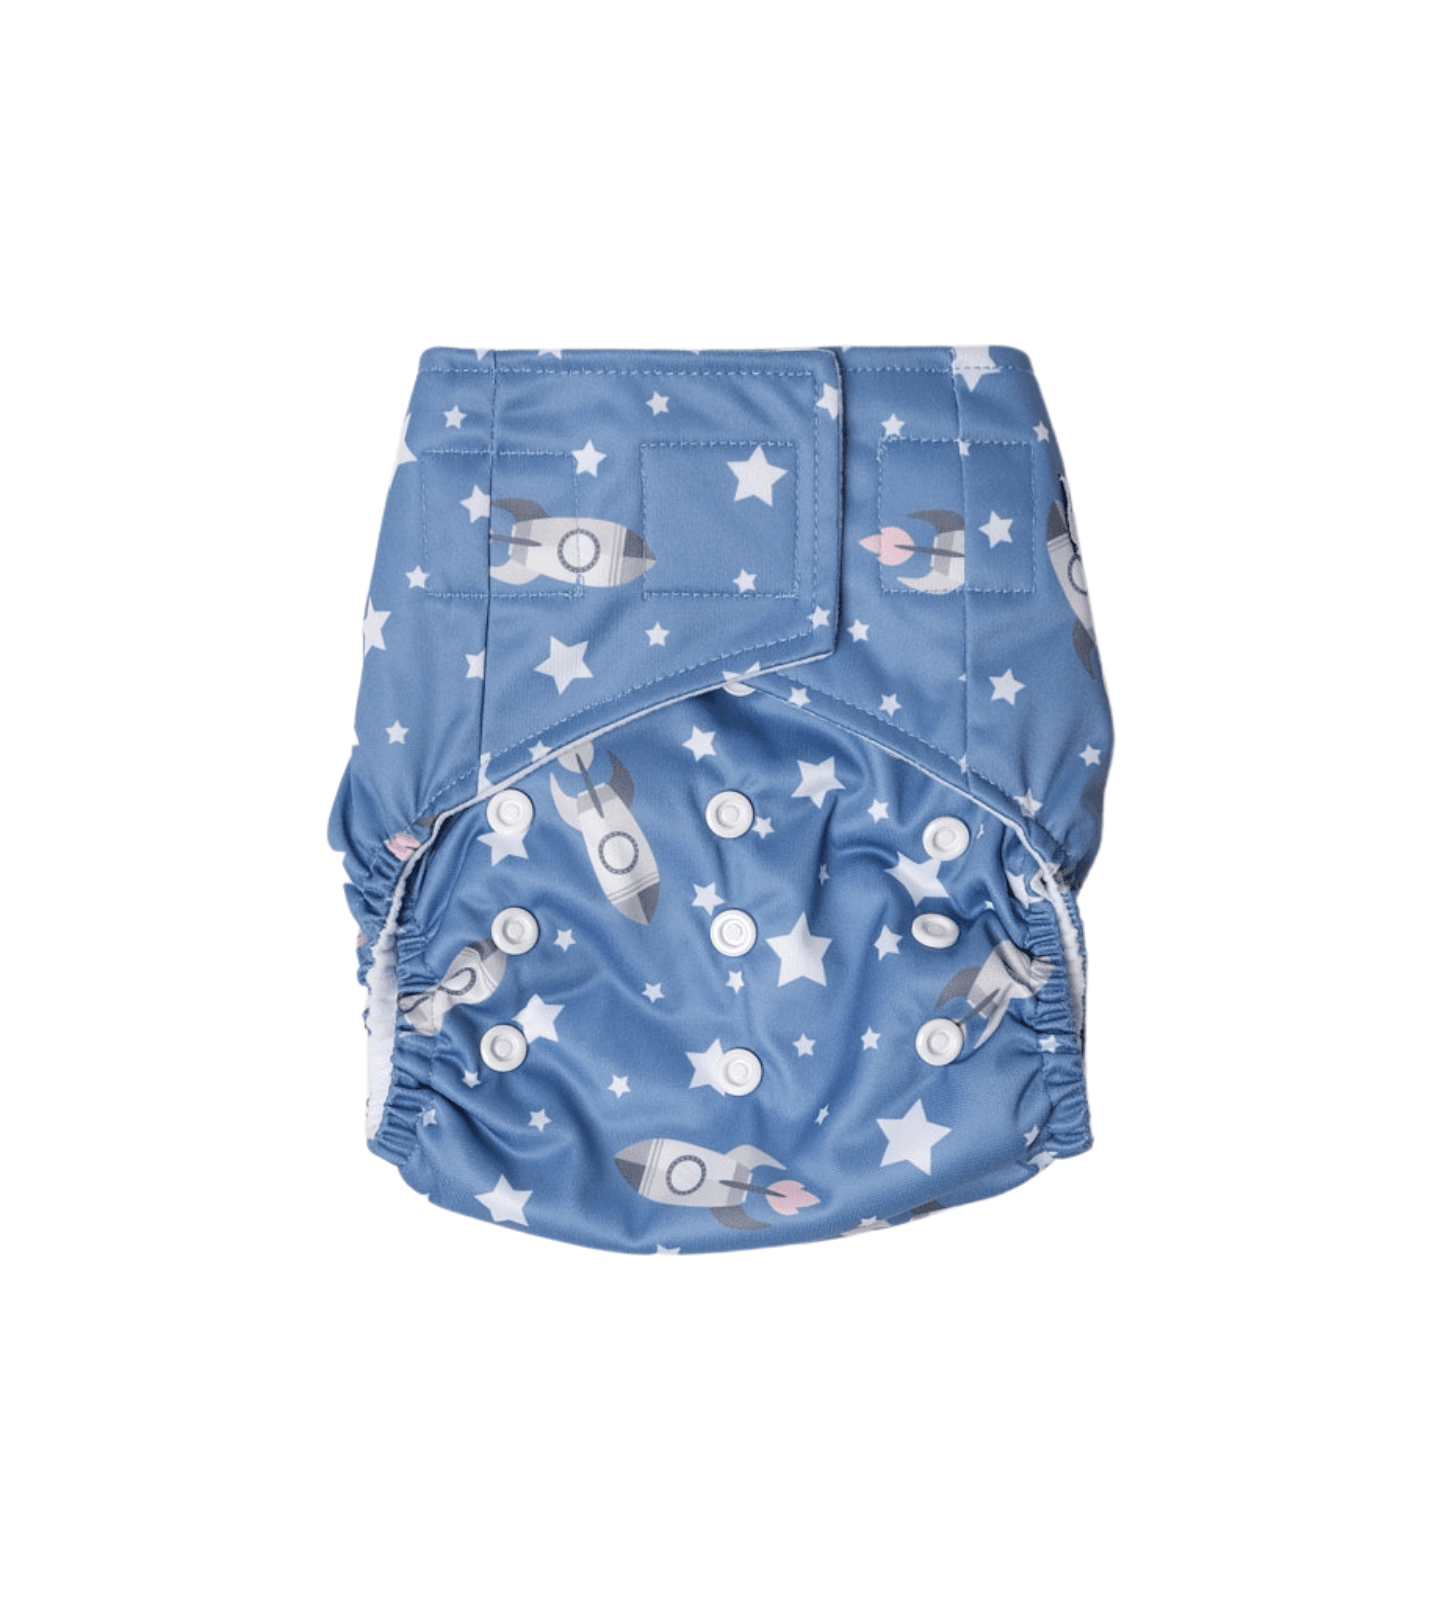 Snazzi Pants All in One Cloth Nappy - Brolly Sheets NZ - Blast Off